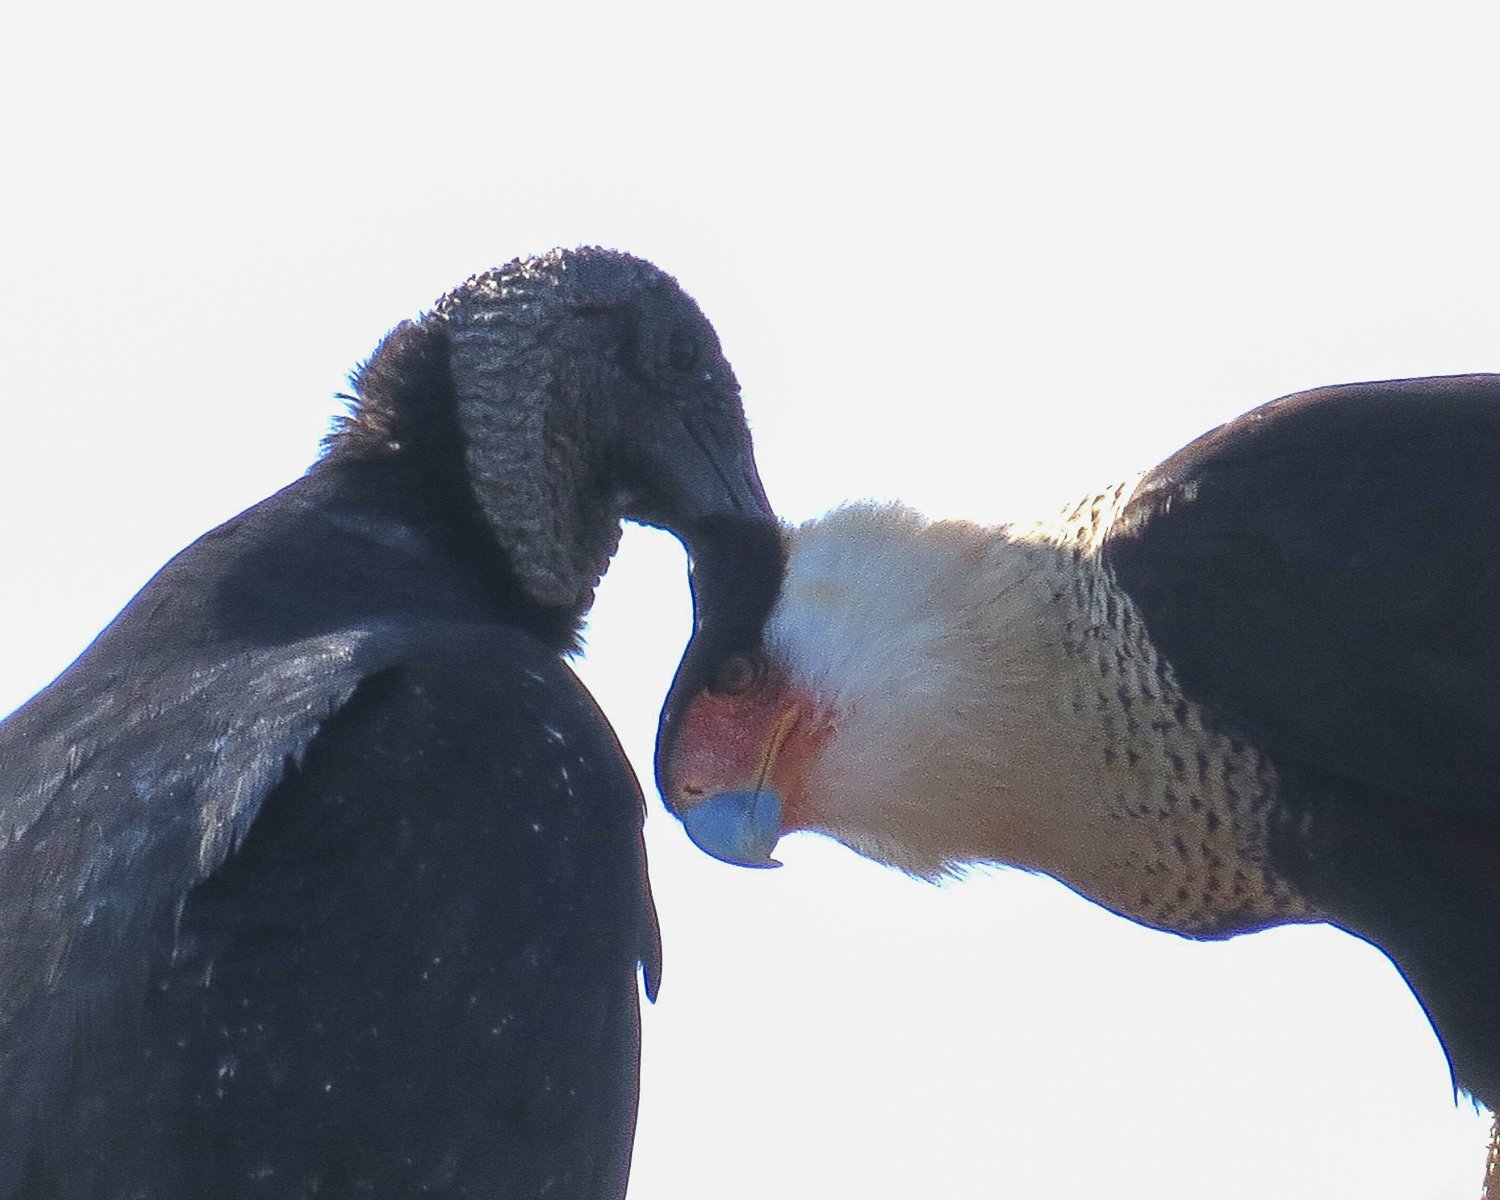  Both Crested Caracaras and Black Vultures are carrion eaters - which means they eat prey that is already dead.  